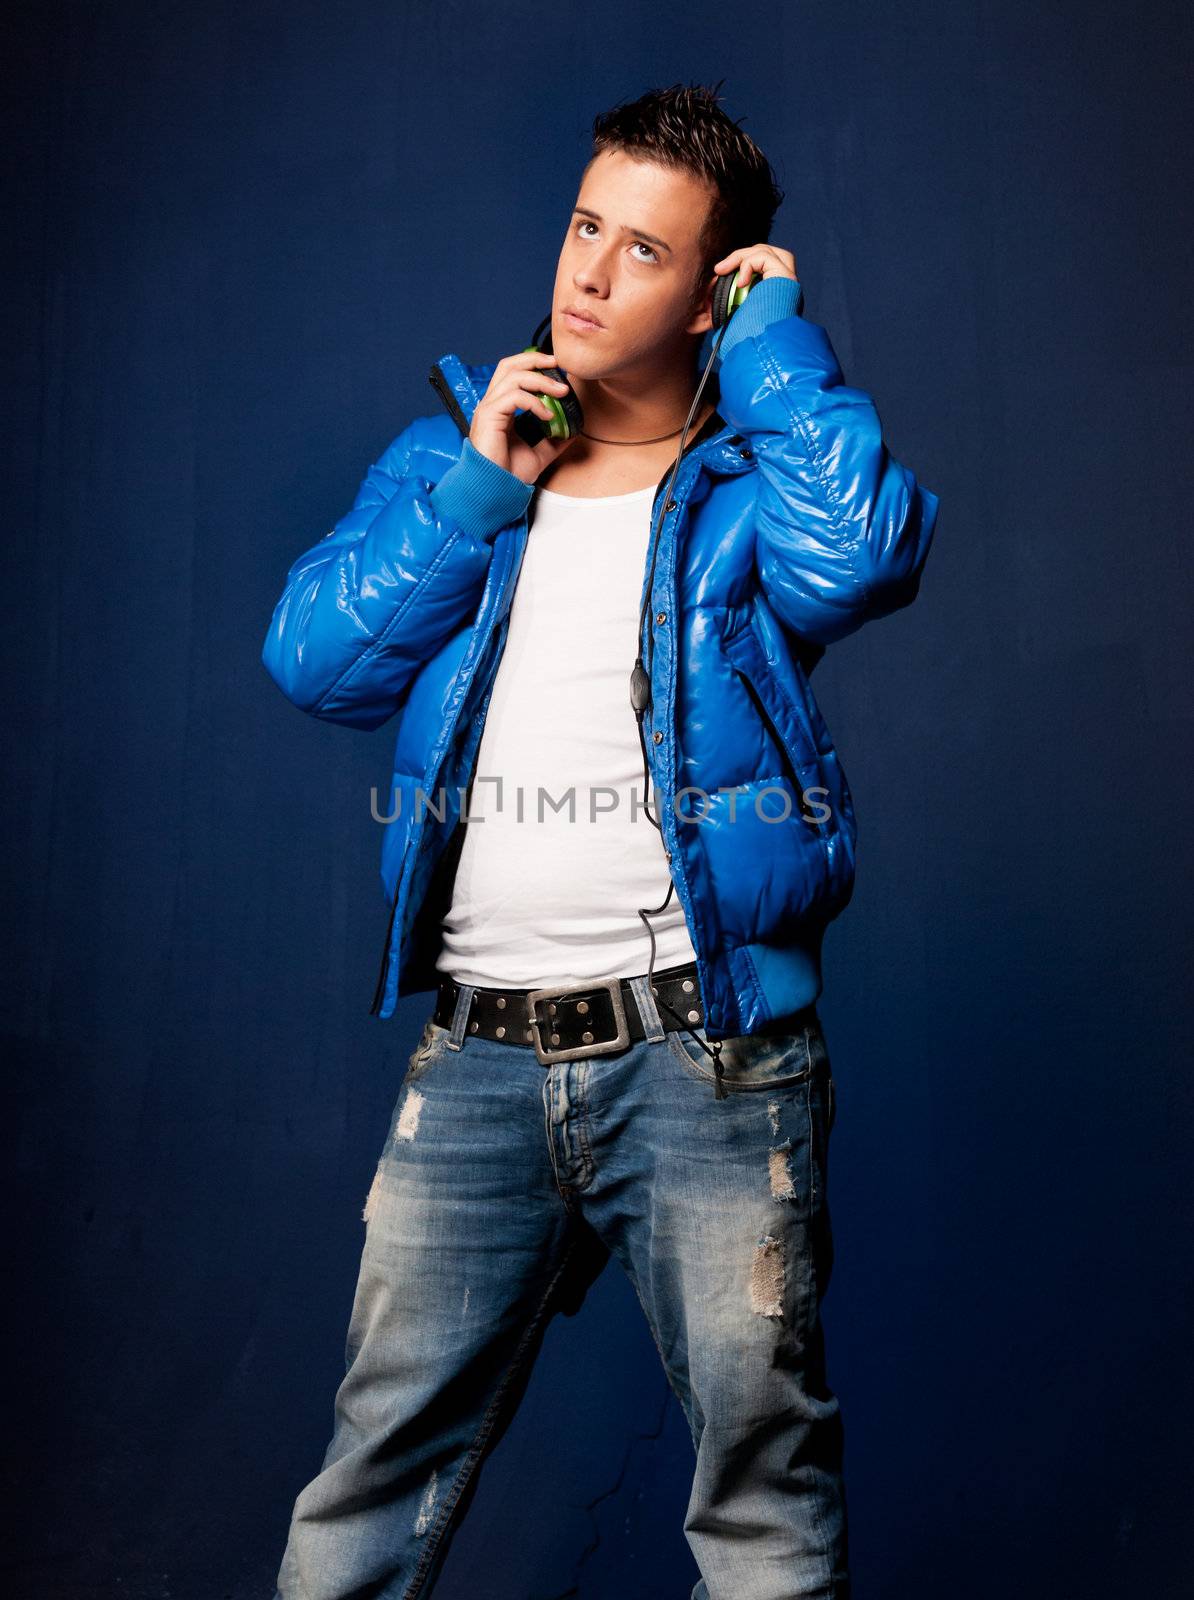 Young man listening music with headphones standing on blue ligh background